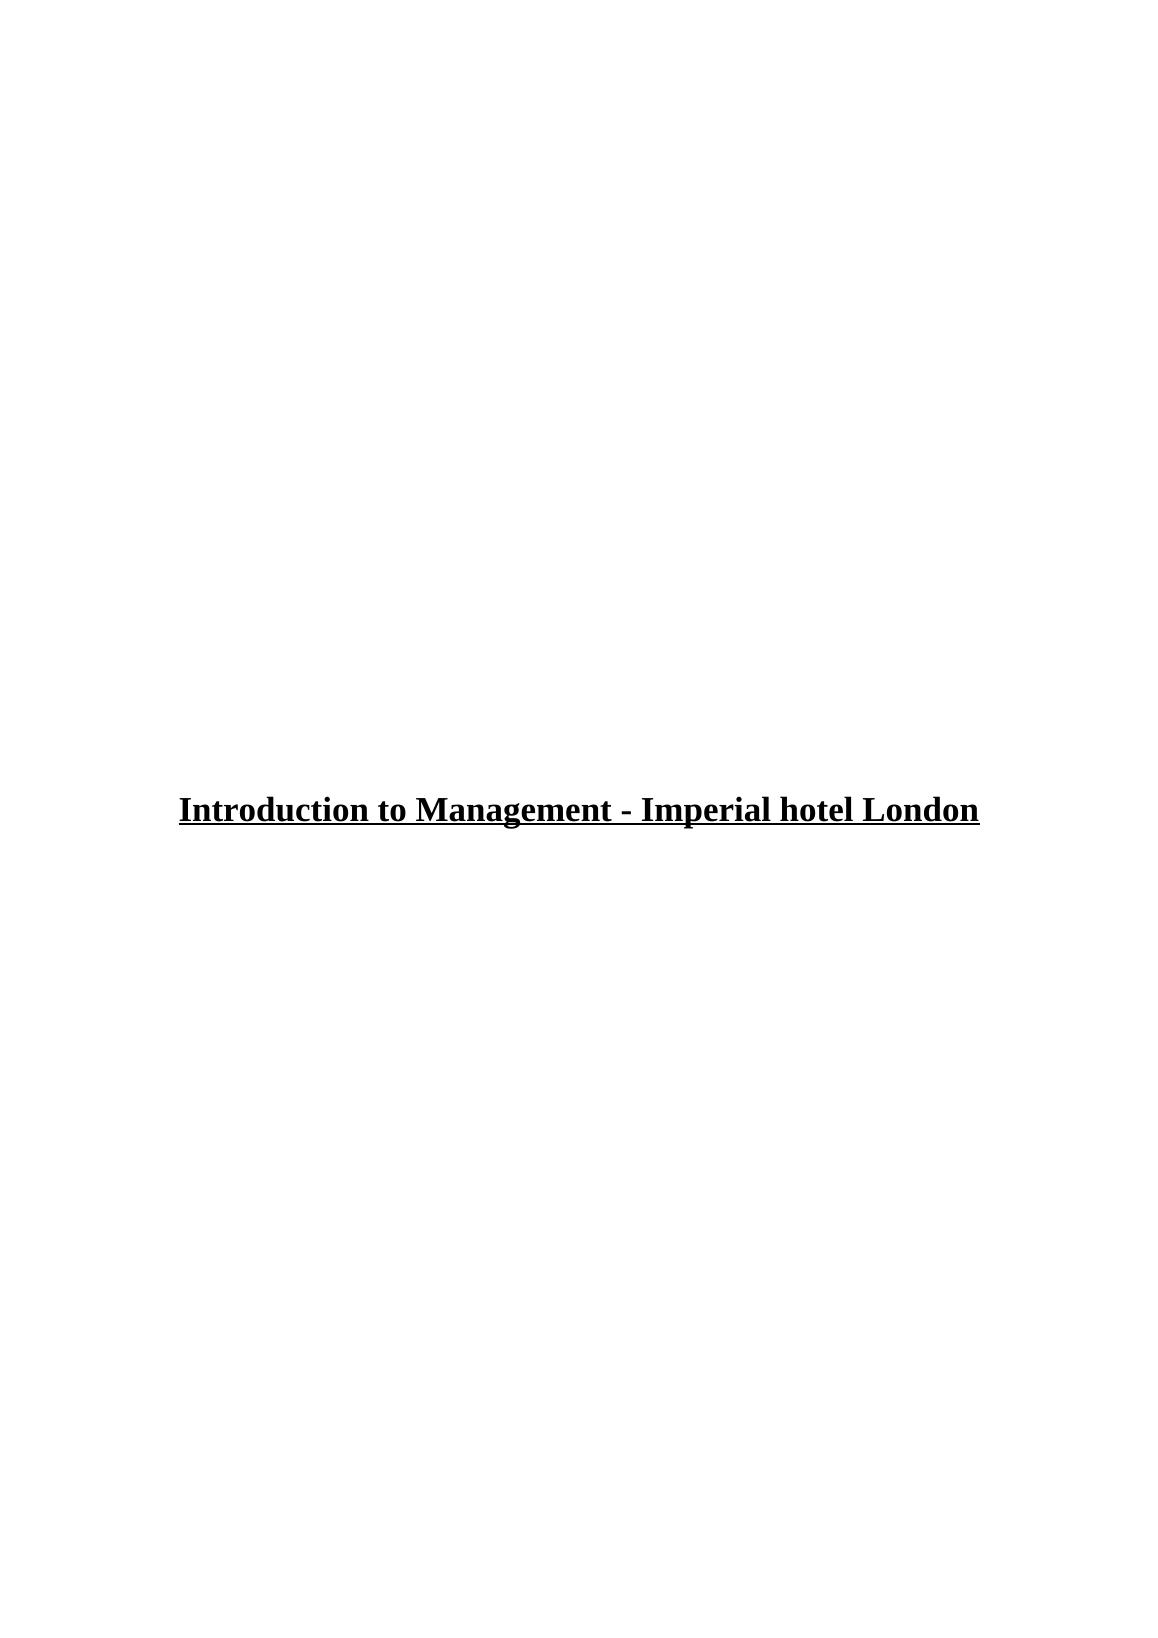 Management of Imperial hotel London : Report_1